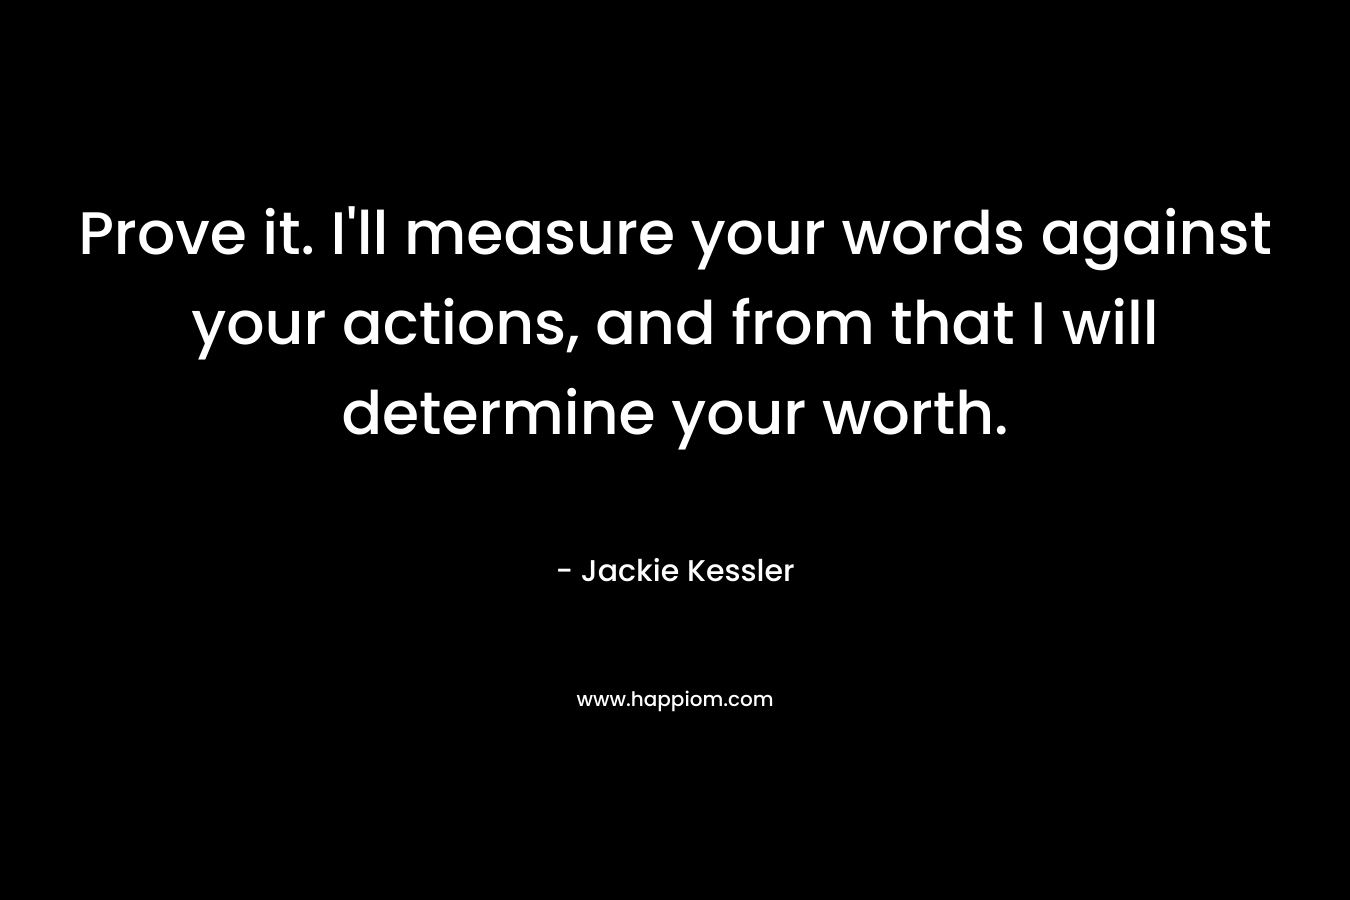 Prove it. I'll measure your words against your actions, and from that I will determine your worth.